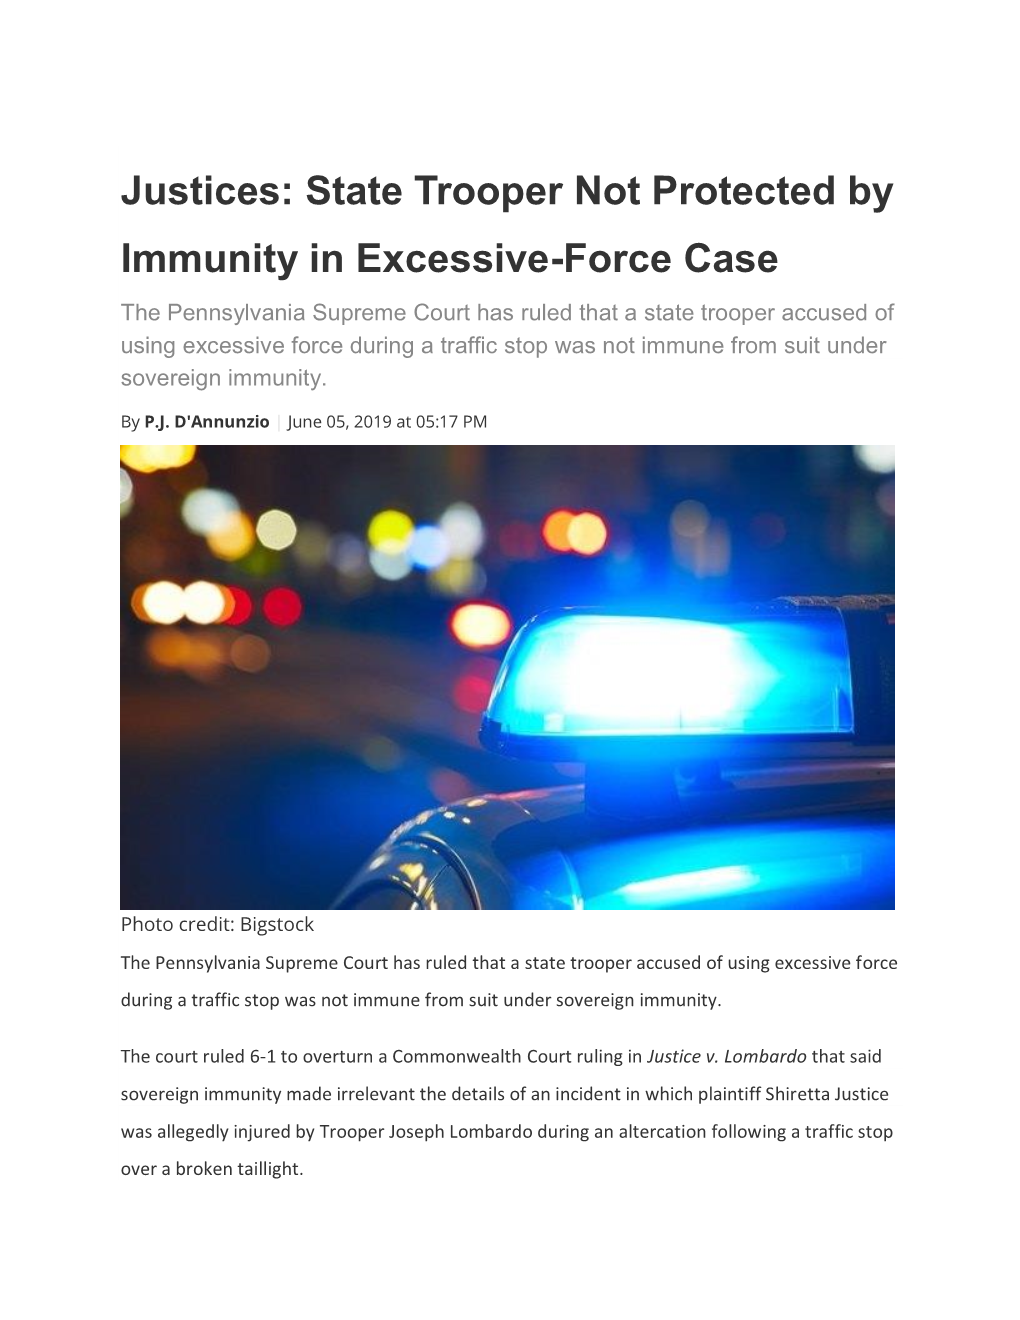 Justices: State Trooper Not Protected by Immunity in Excessive-Force Case